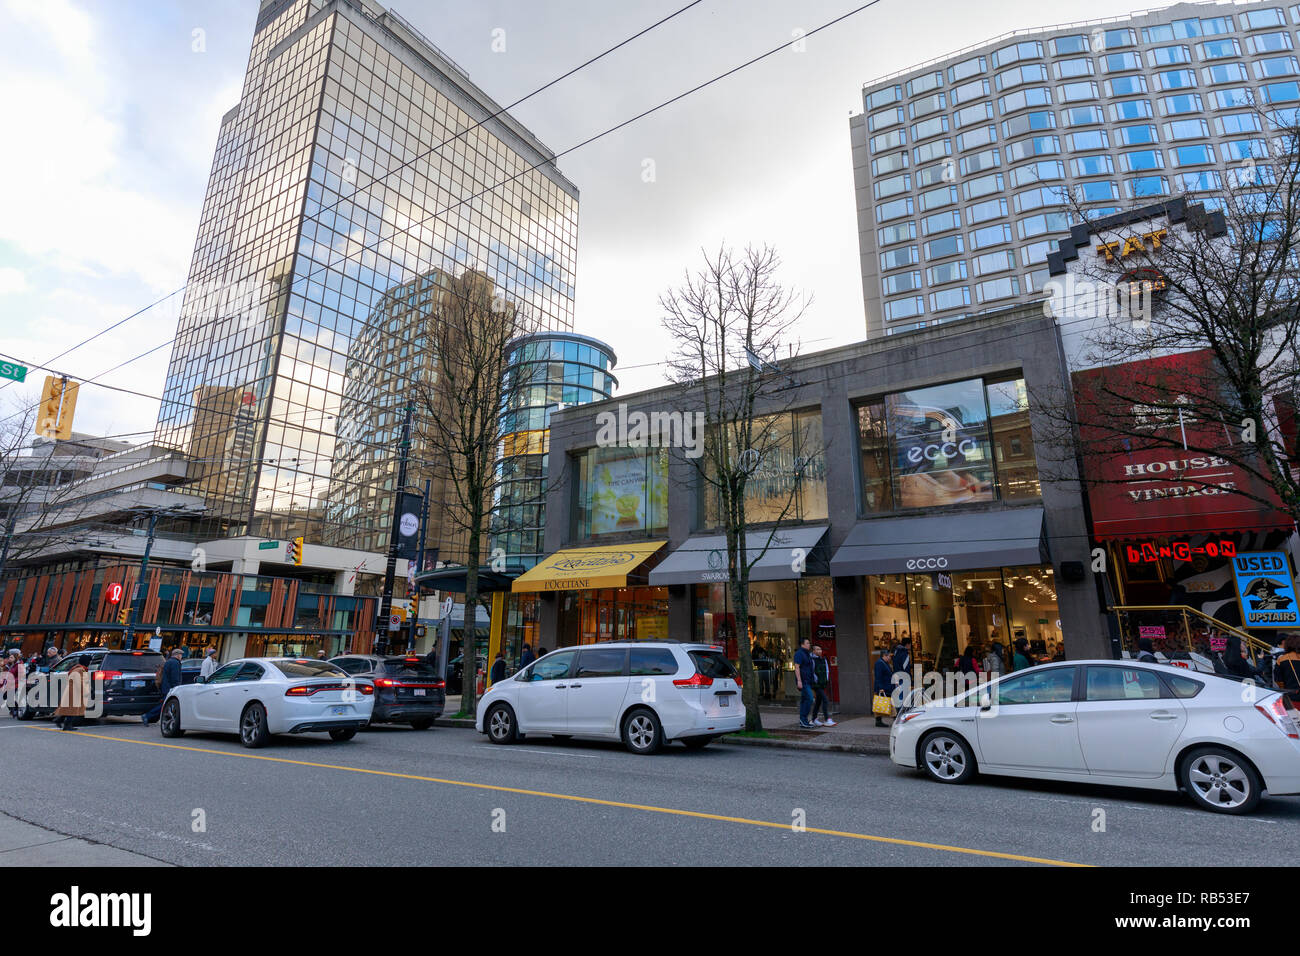 603 Robson Street Vancouver Images, Stock Photos, 3D objects, & Vectors